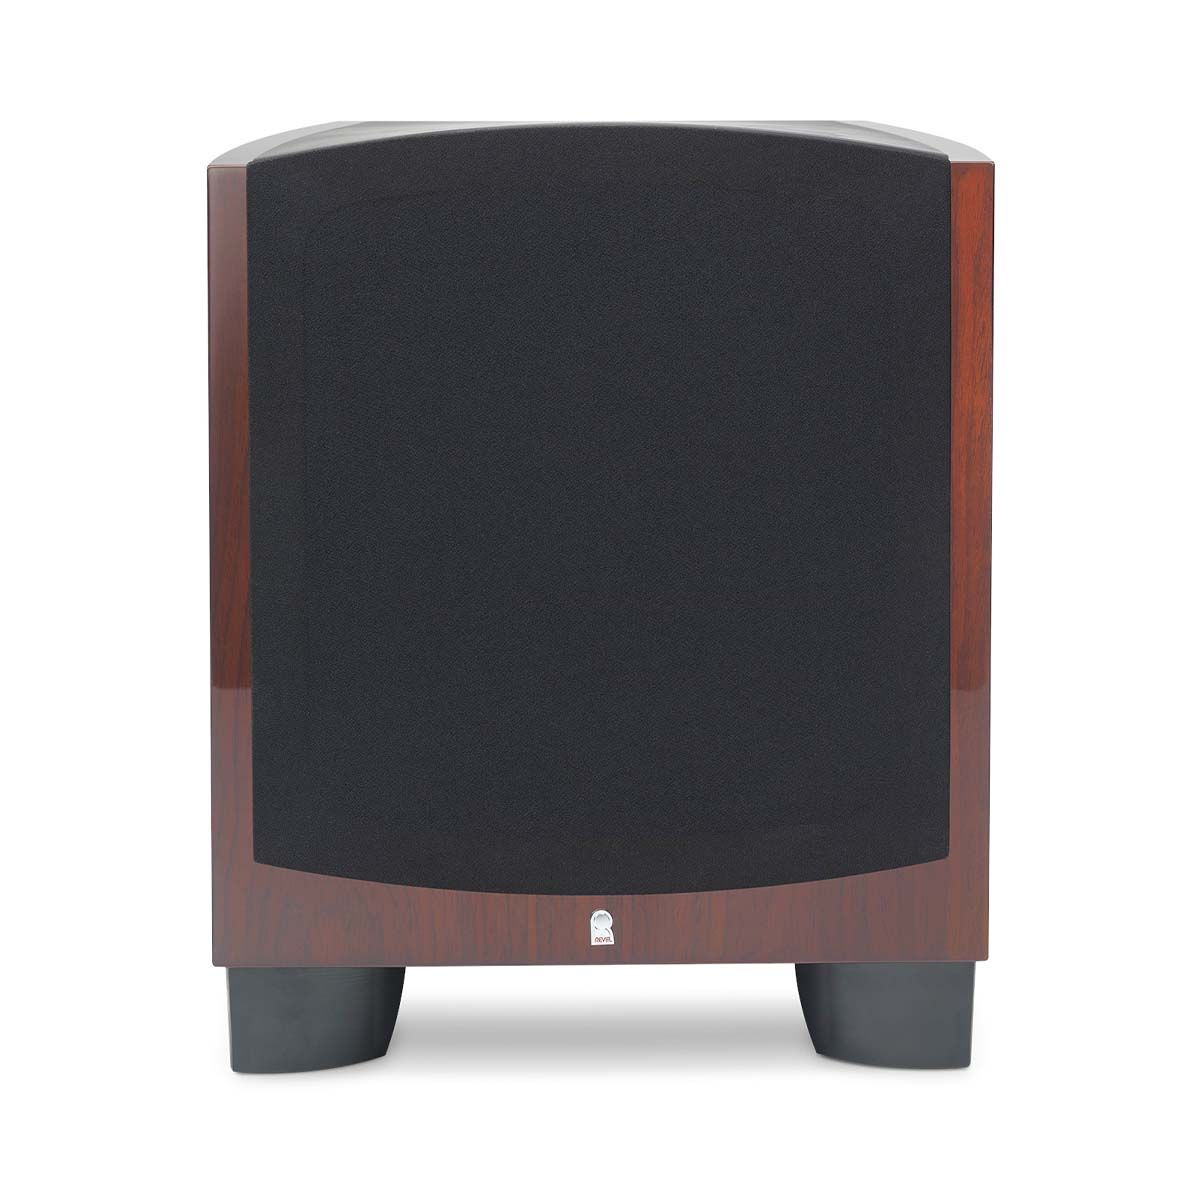 Revel B110v2 10” 1000W Powered Subwoofer - single walnut with grille - front view